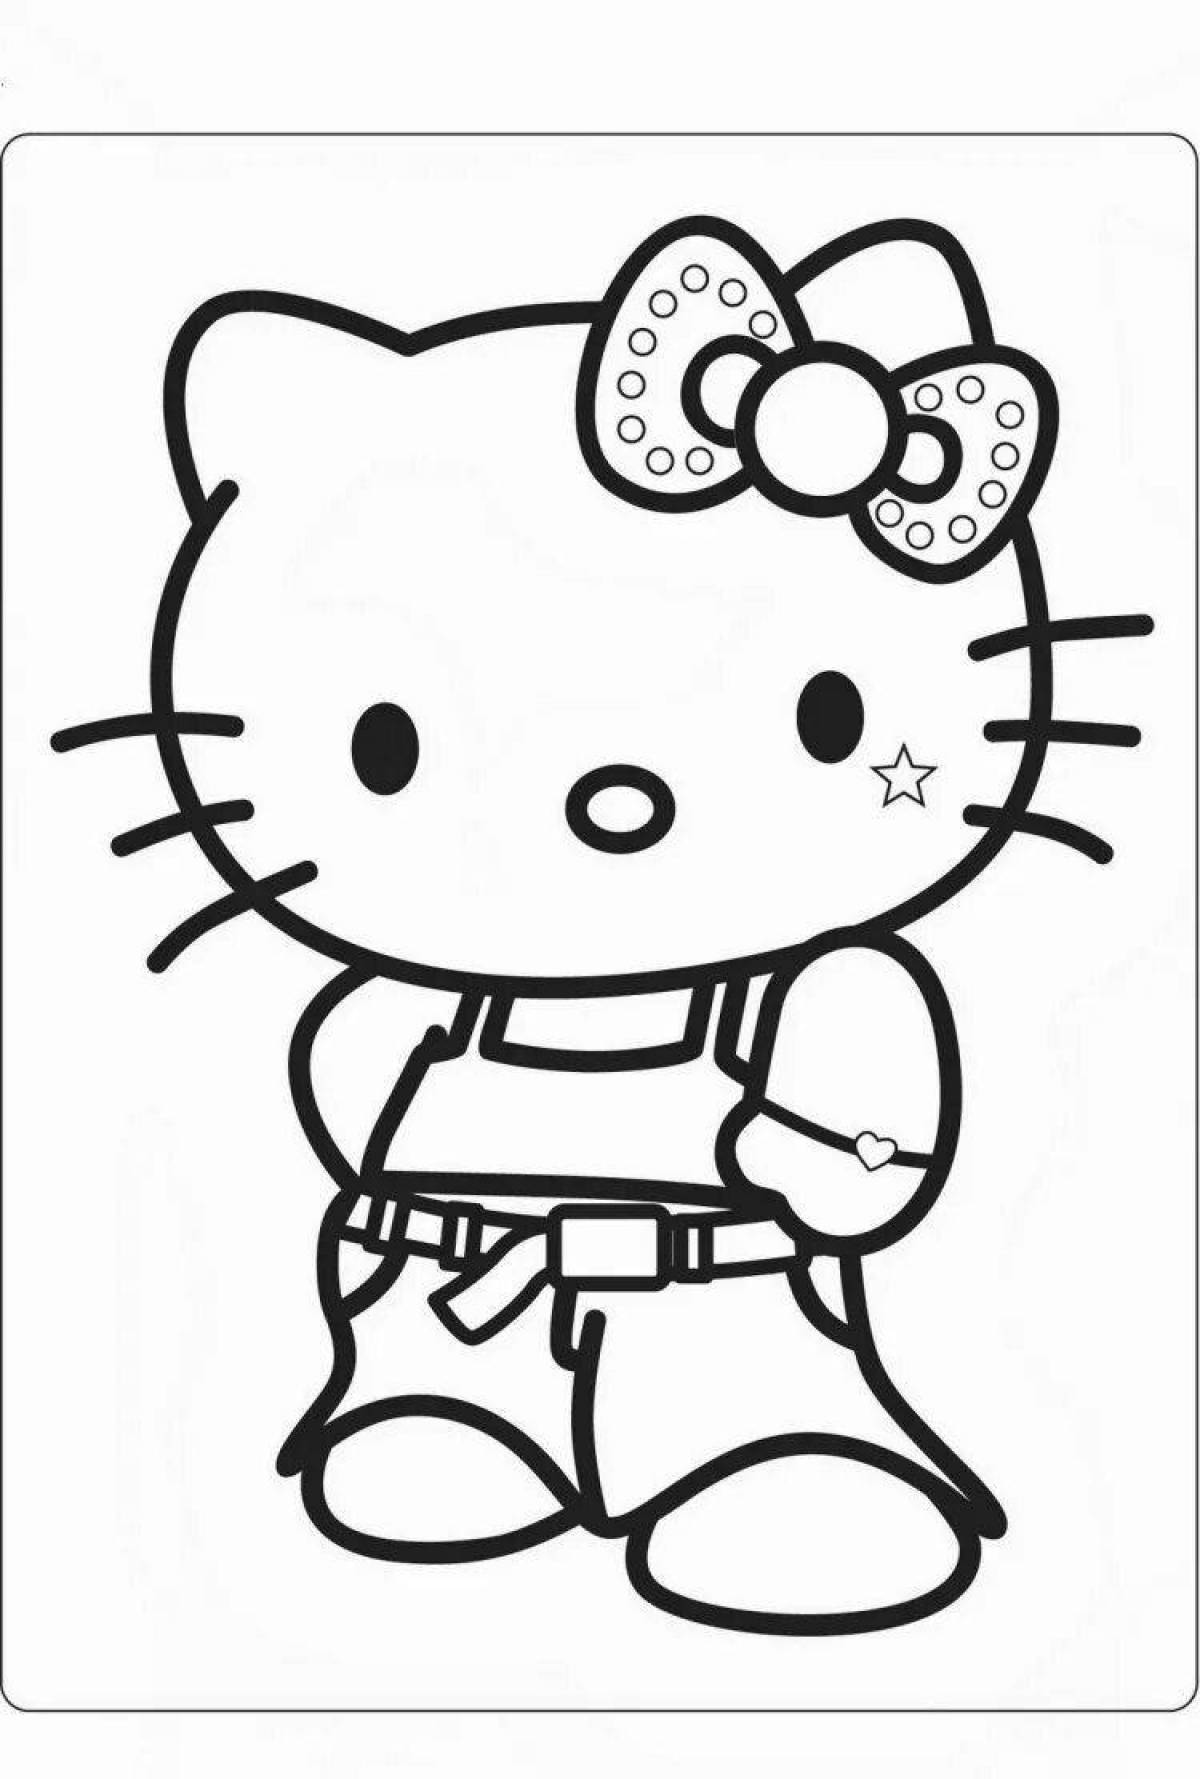 Great coloring hello kitty stickers